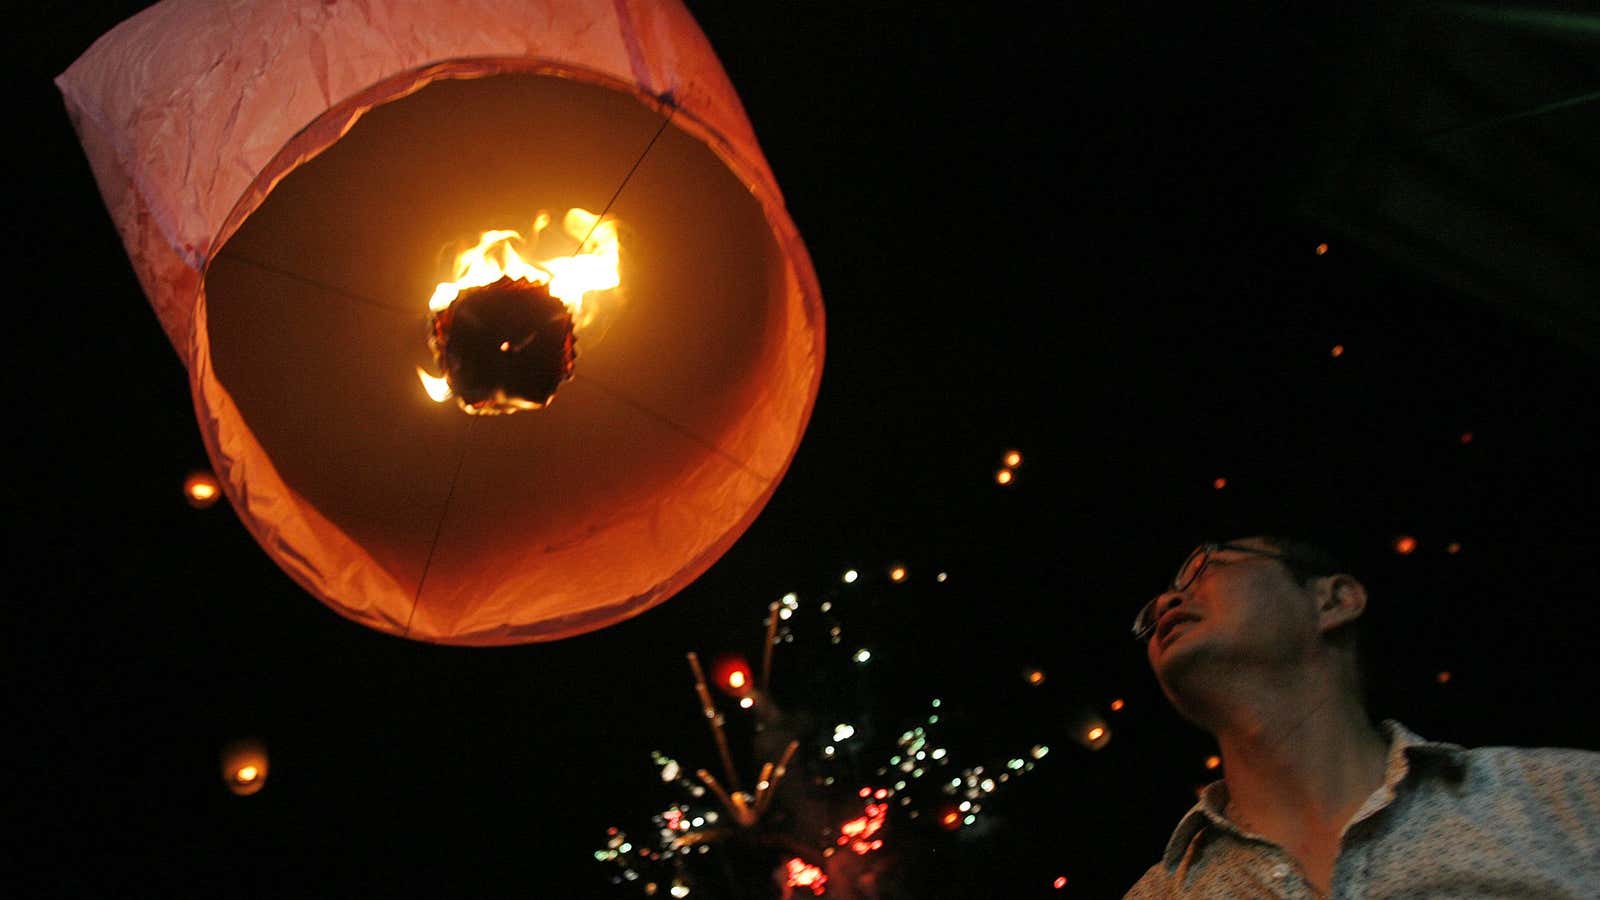 A man releases a lantern during Chinese Valentine’s Day or “Qi Xi” festivities in Shifen,Taiwan.